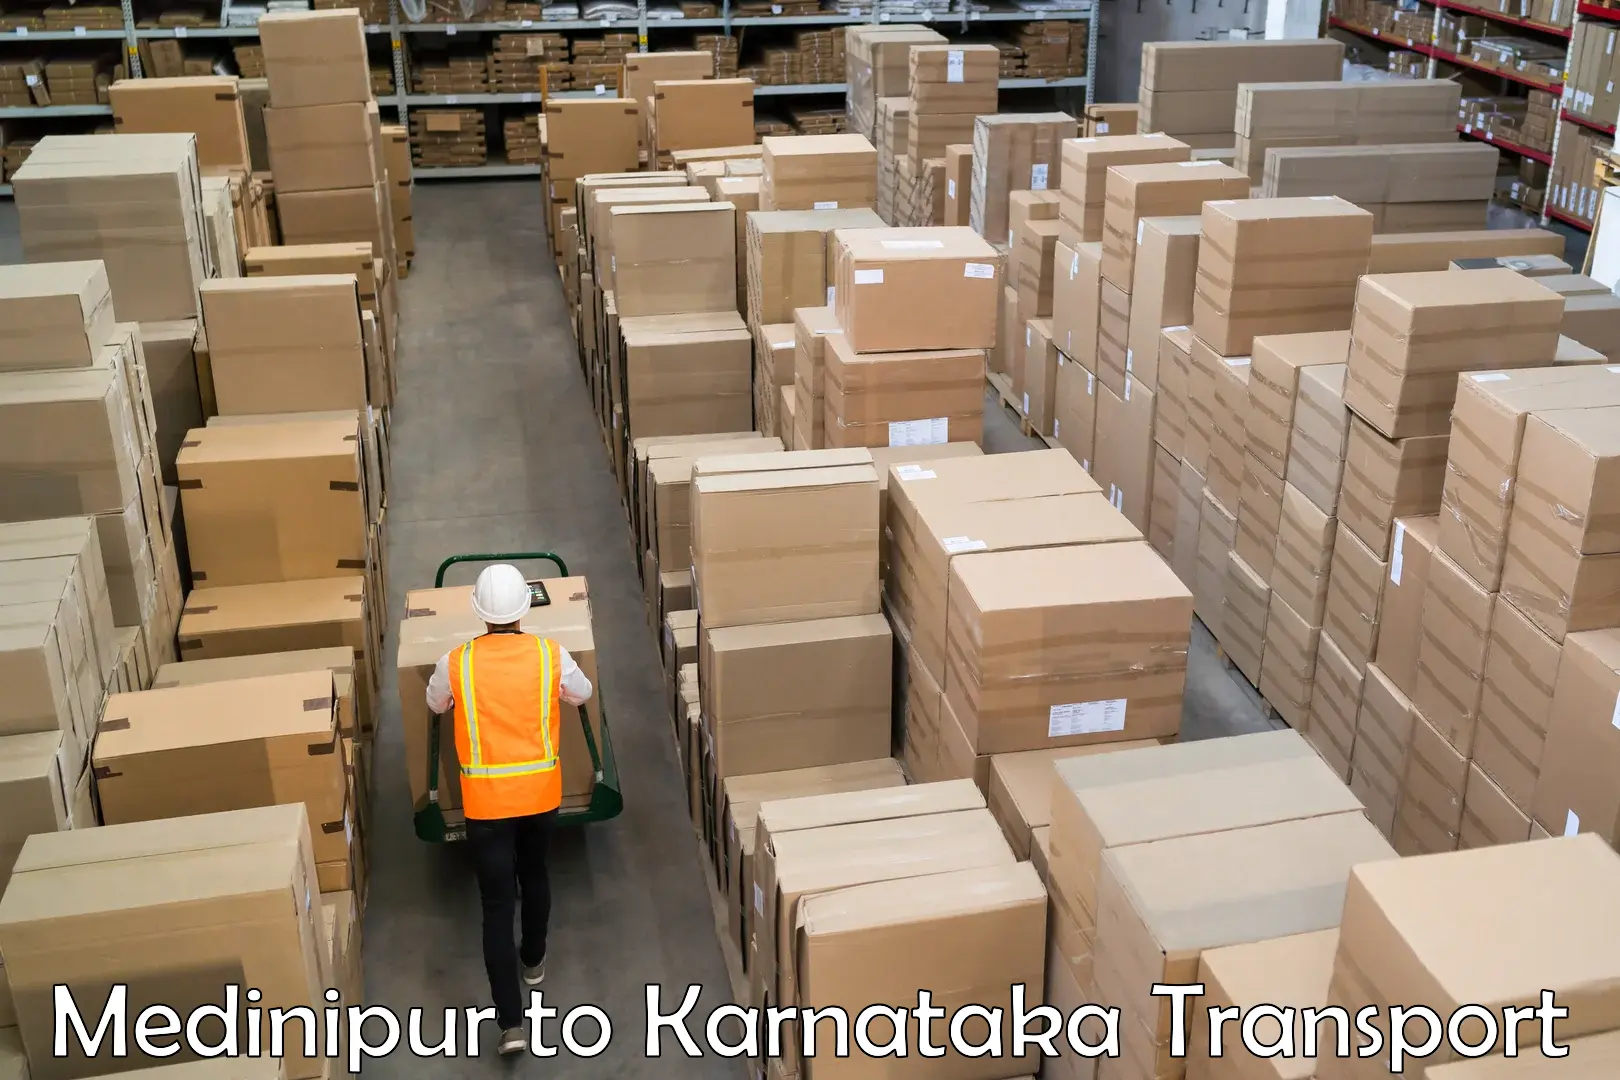 Truck transport companies in India Medinipur to Channapatna